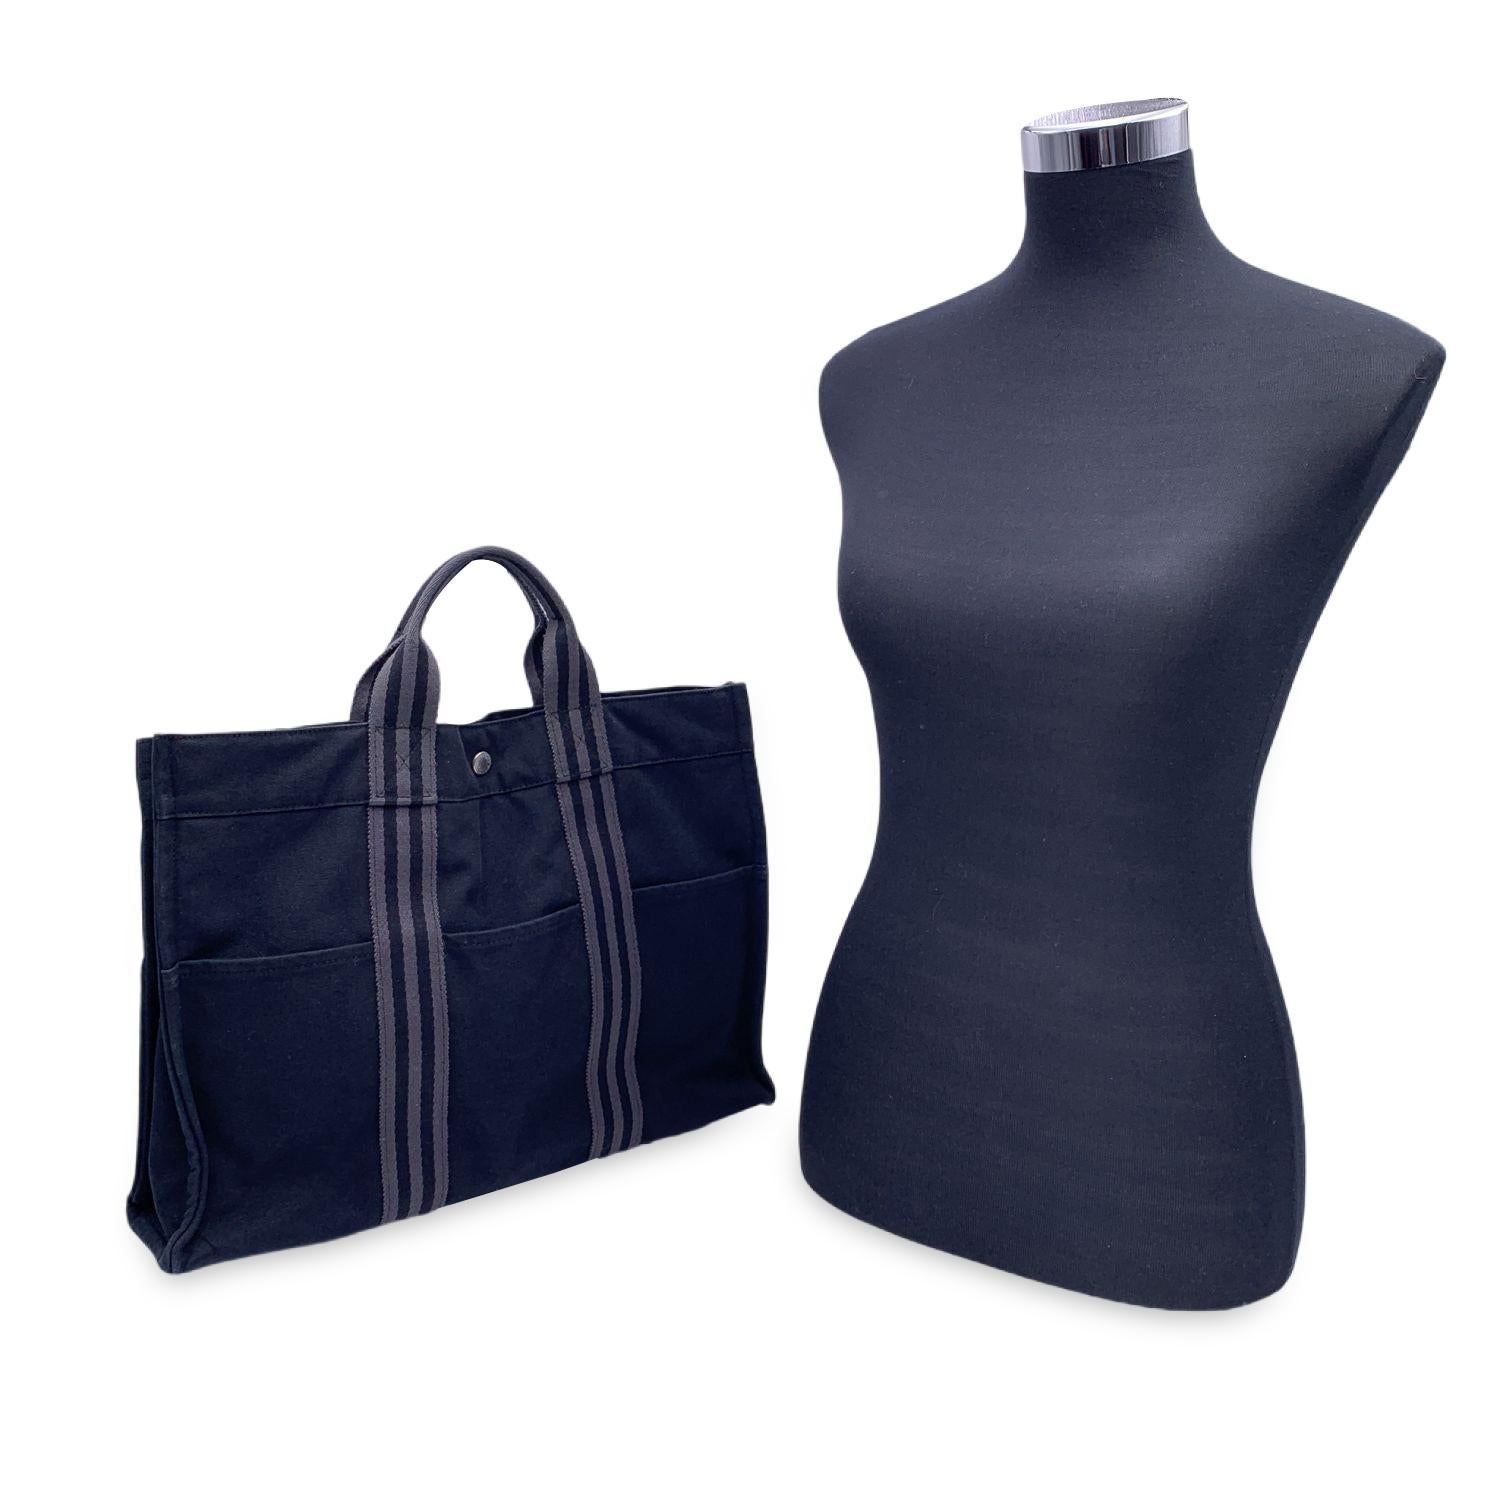 'HERMES FOURRE TOUT - MM' - Tote handbag. Made in France. Black color with grey stripes. Material: 100% cotton. It has snaps on both ends for expansion. Durable canvas handles, perfect for casual and everyday use. 3 open pockets on the front and 3